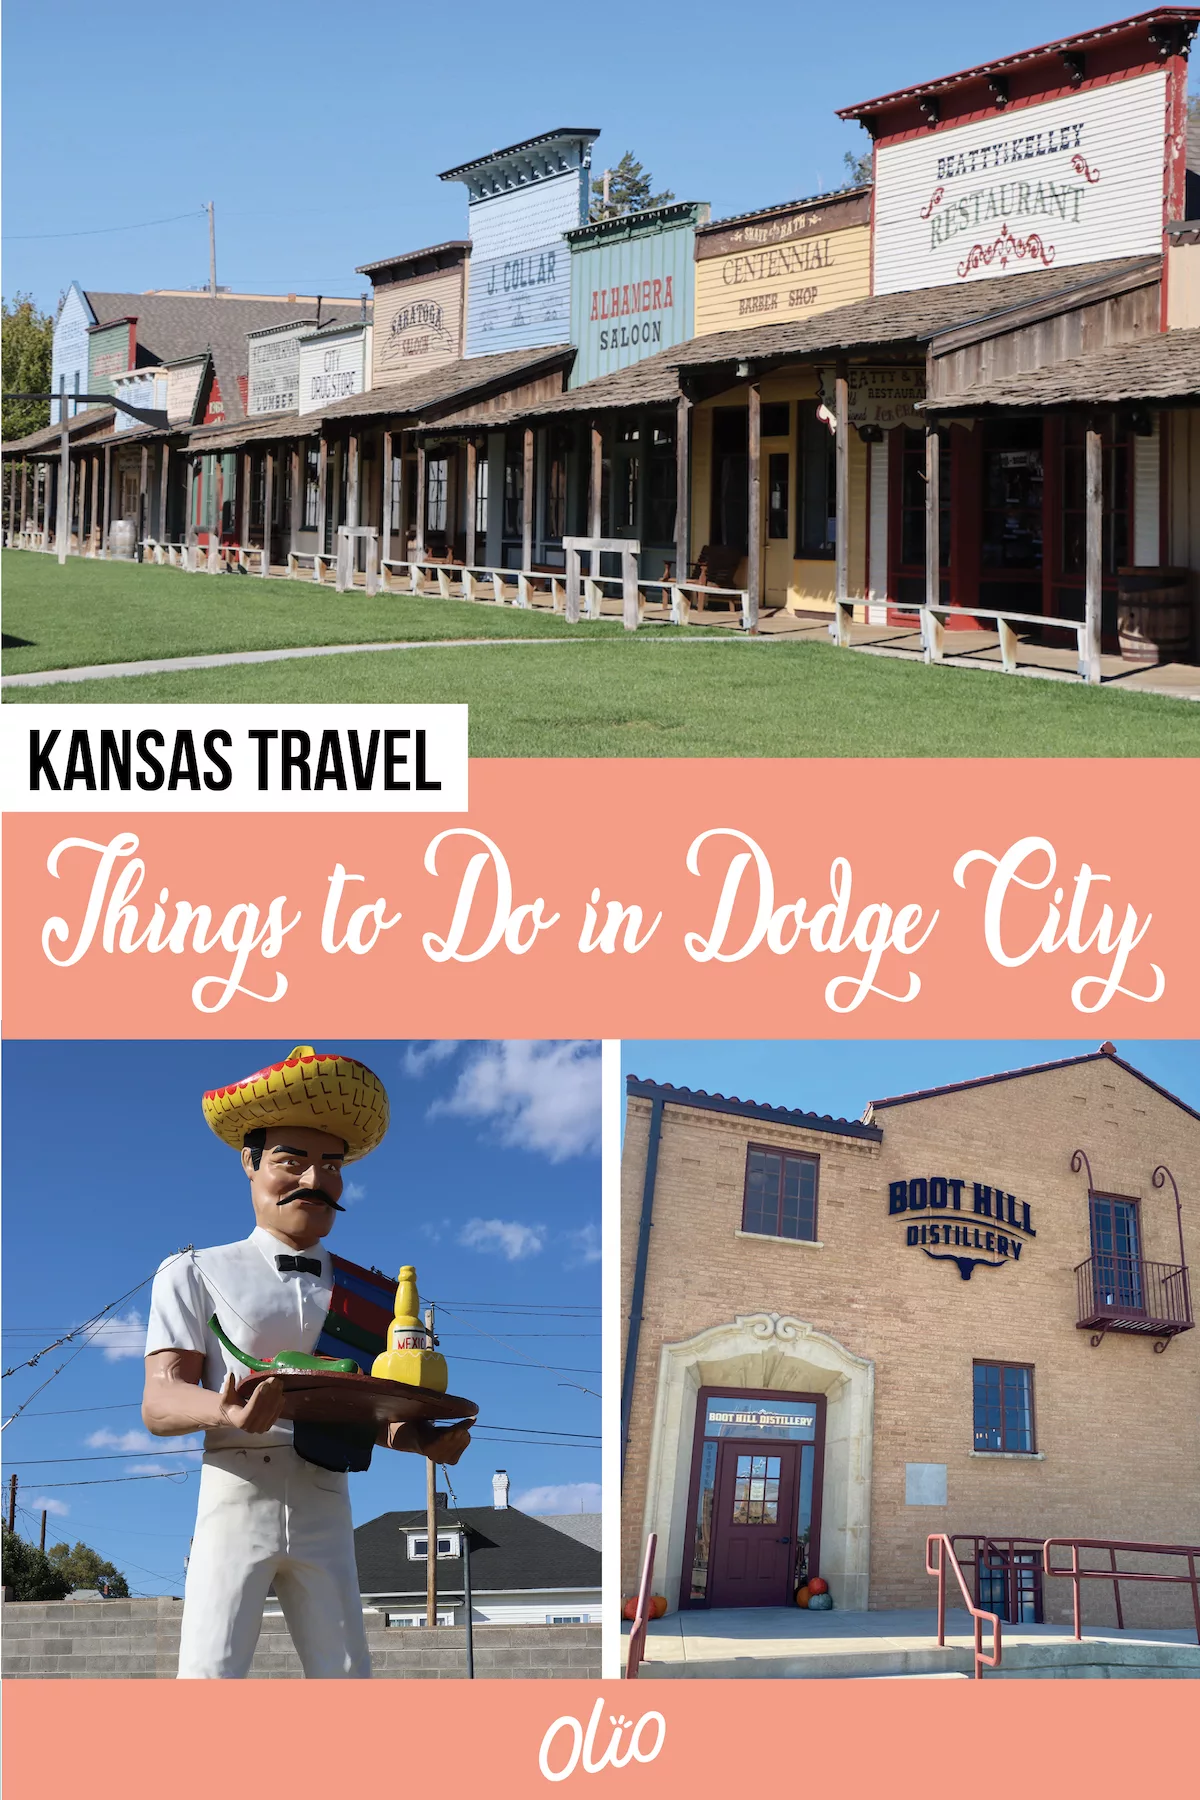 Welcome to the Wild West! Dodge City, Kansas was once one of the most notorious towns in the West. Things have quieted down but there are still lots of things to do in Dodge City, Kansas. From rich local history to epic eateries, there are lots of reasons to explore the Queen of the Cowtowns.